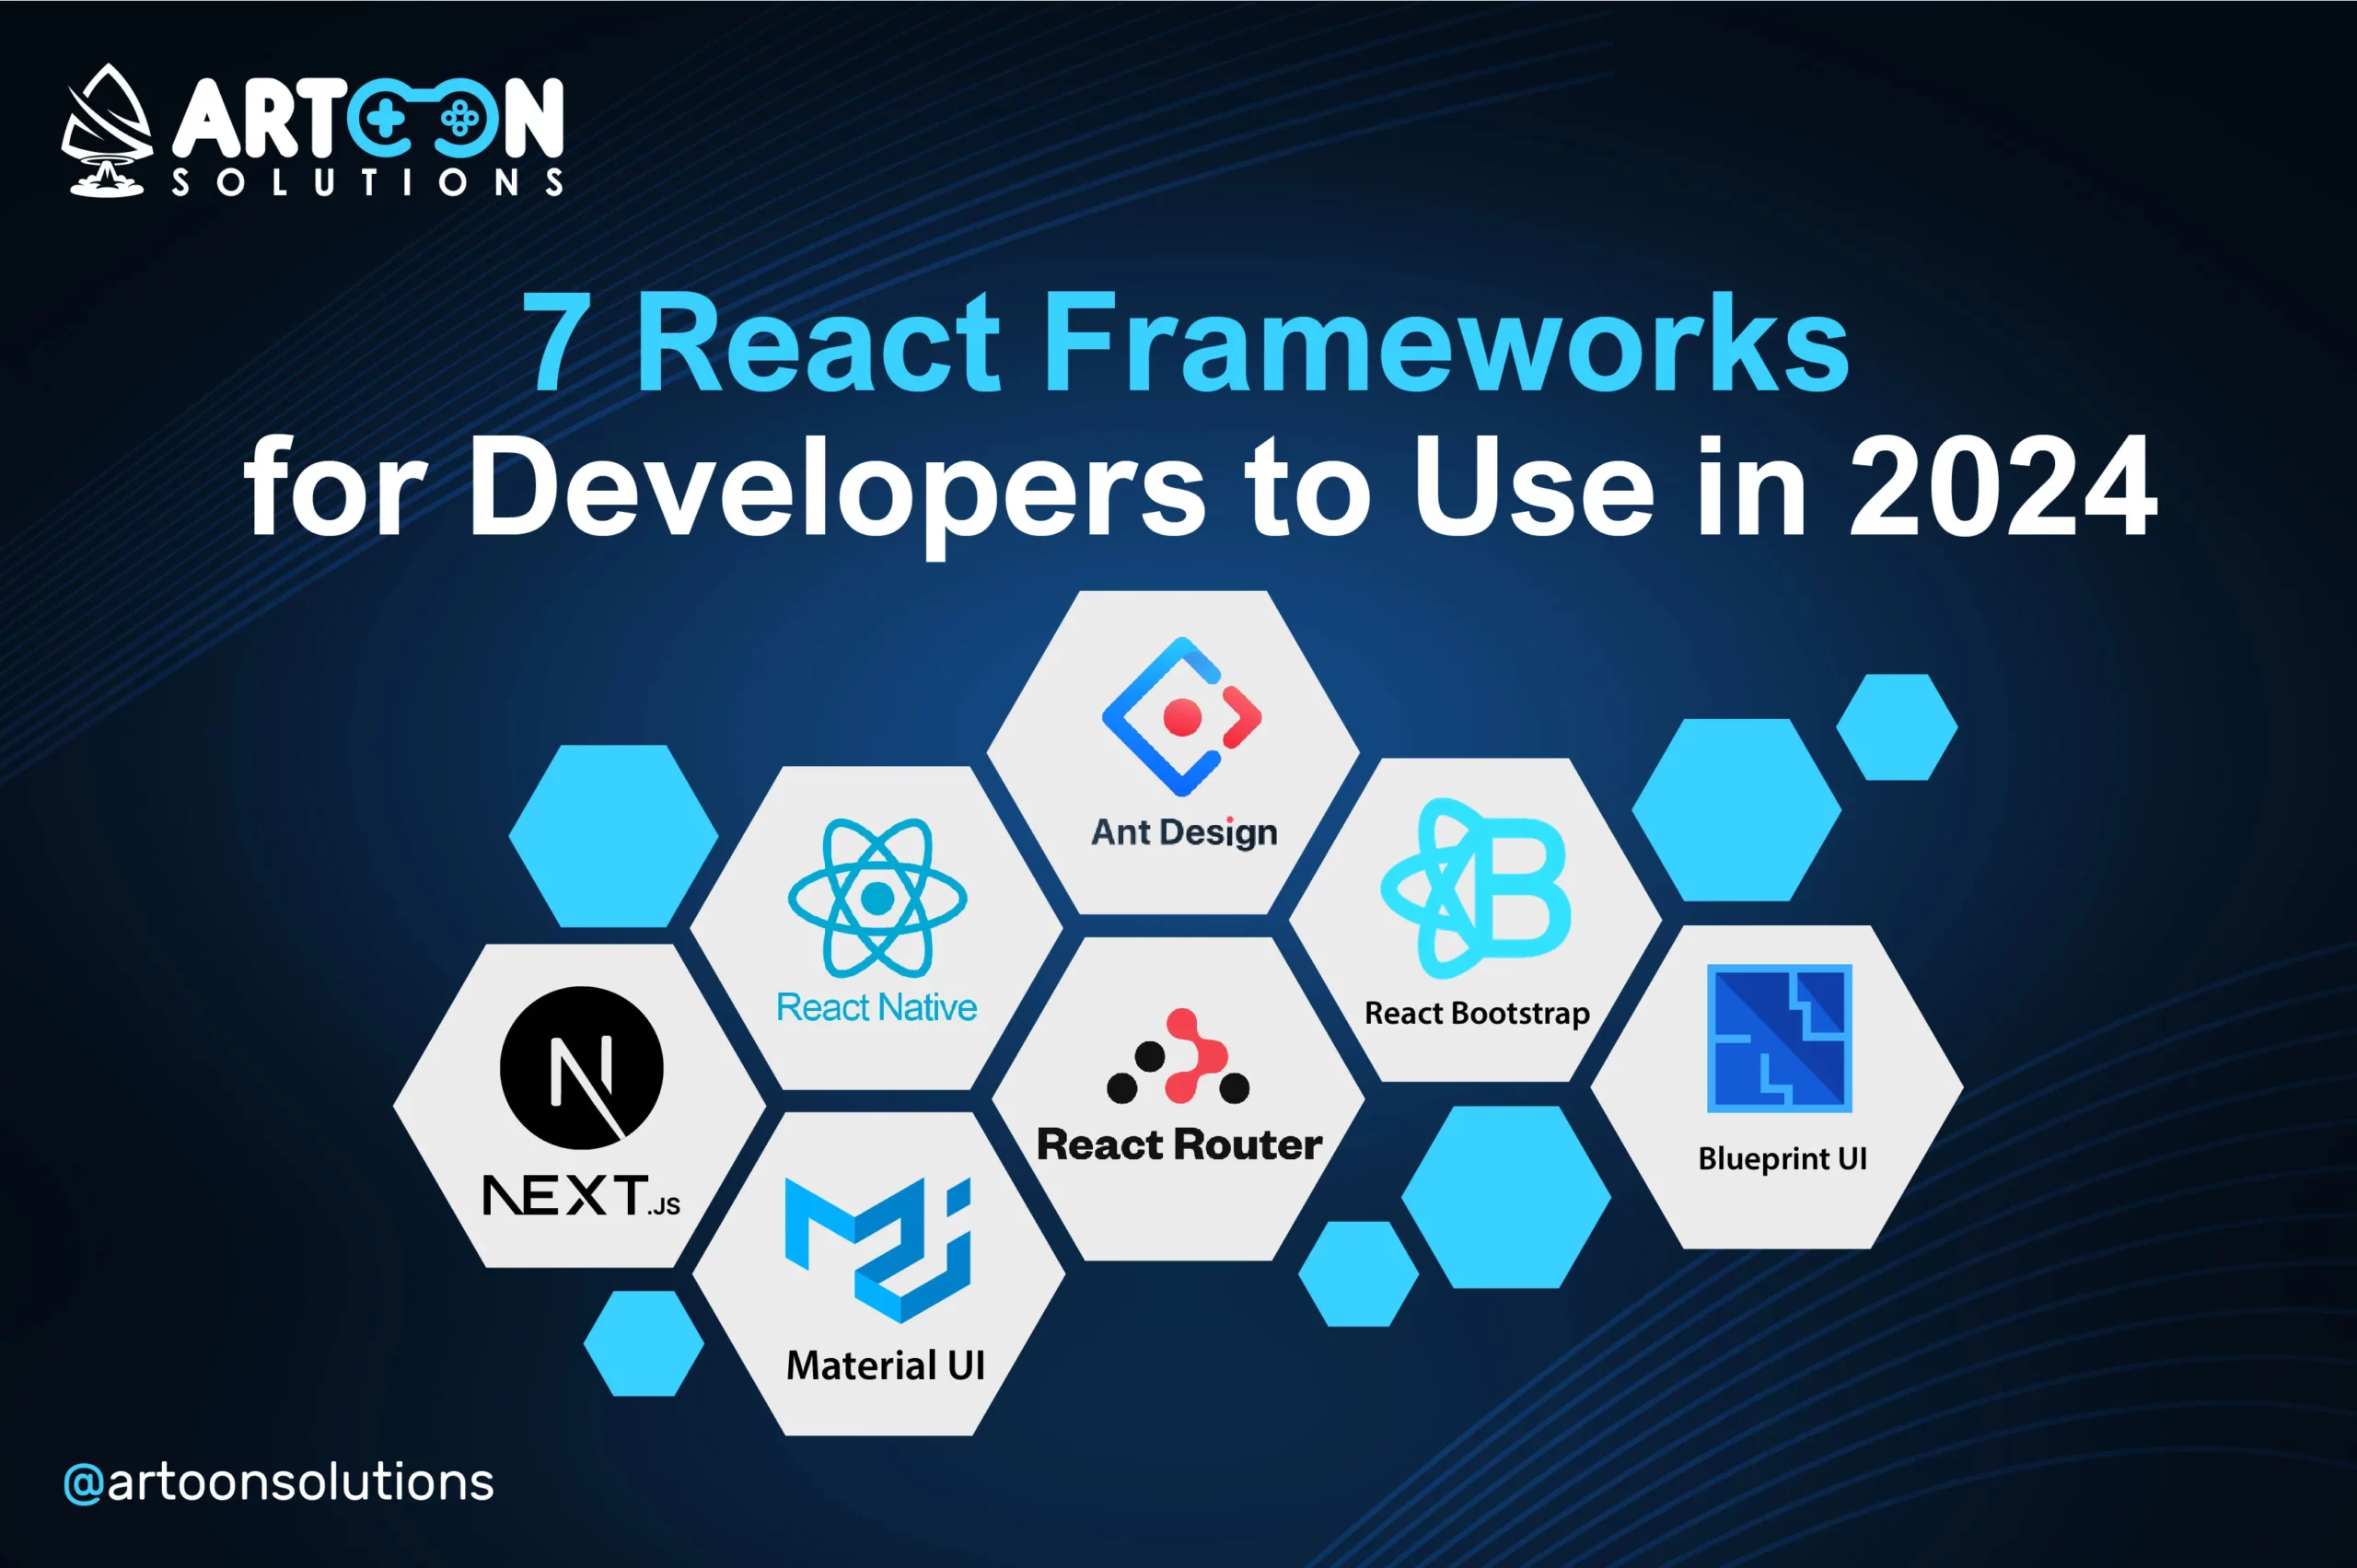 7 React Frameworks for Developers to Use in 2024